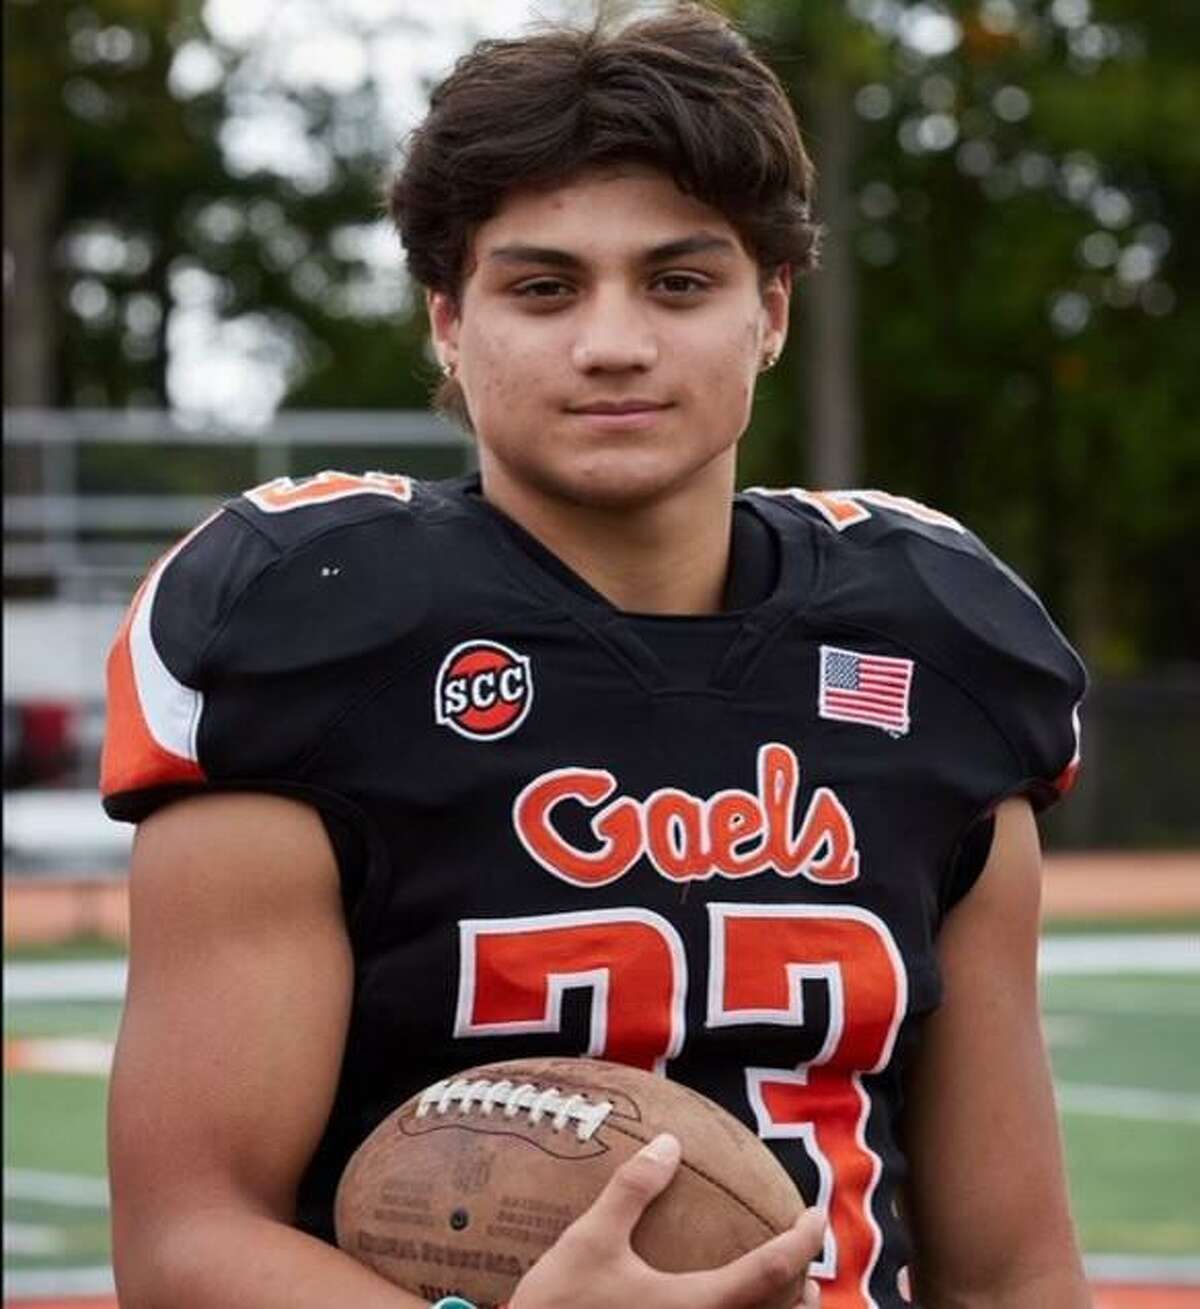 Jacob Villalobos captains two teams at Shelton. From that experience, he has found his calling.